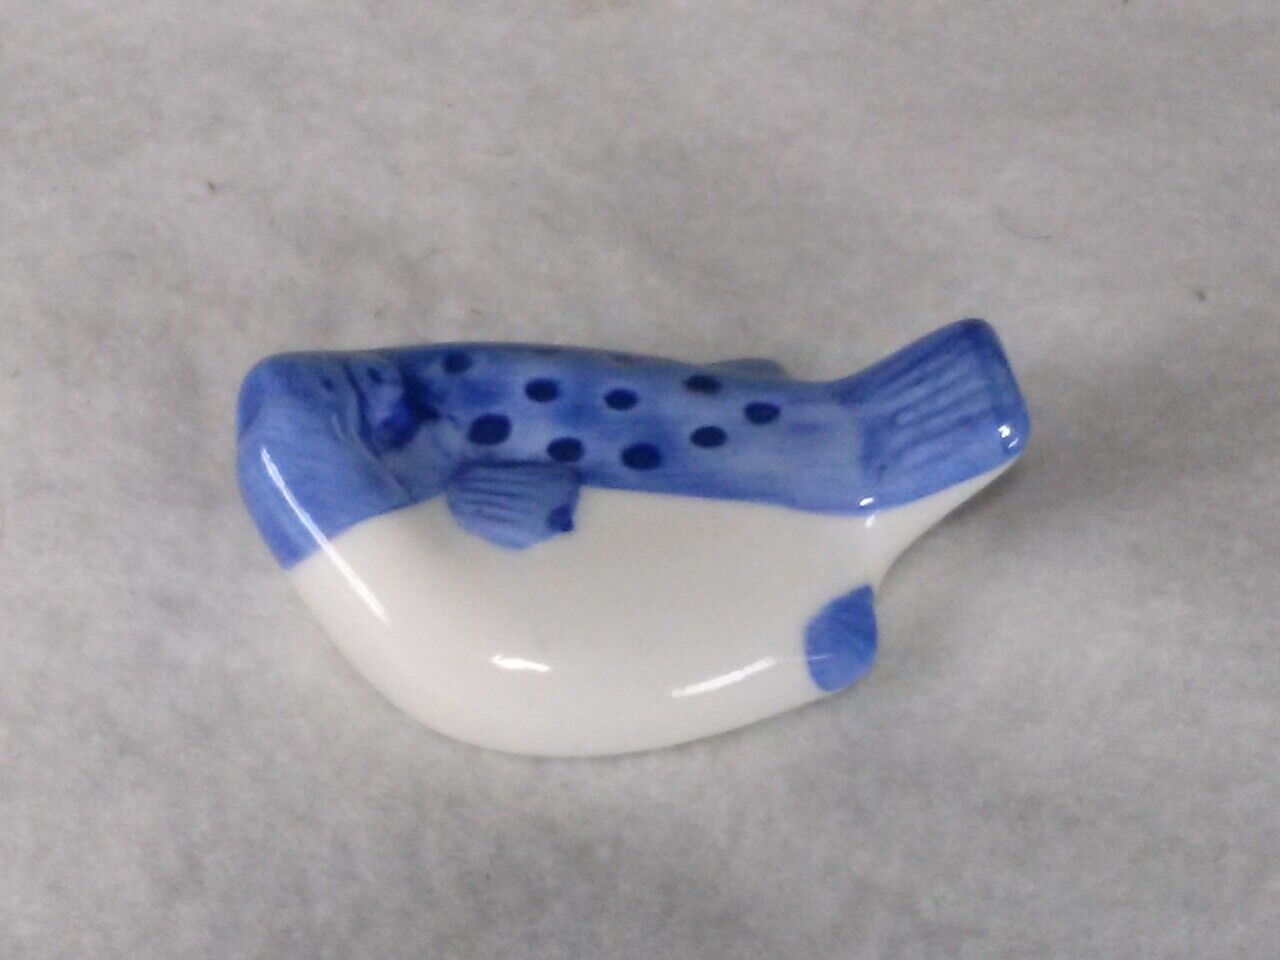 chopstick rest Blowfish Pottery in Recommended Max 85% OFF Japan made